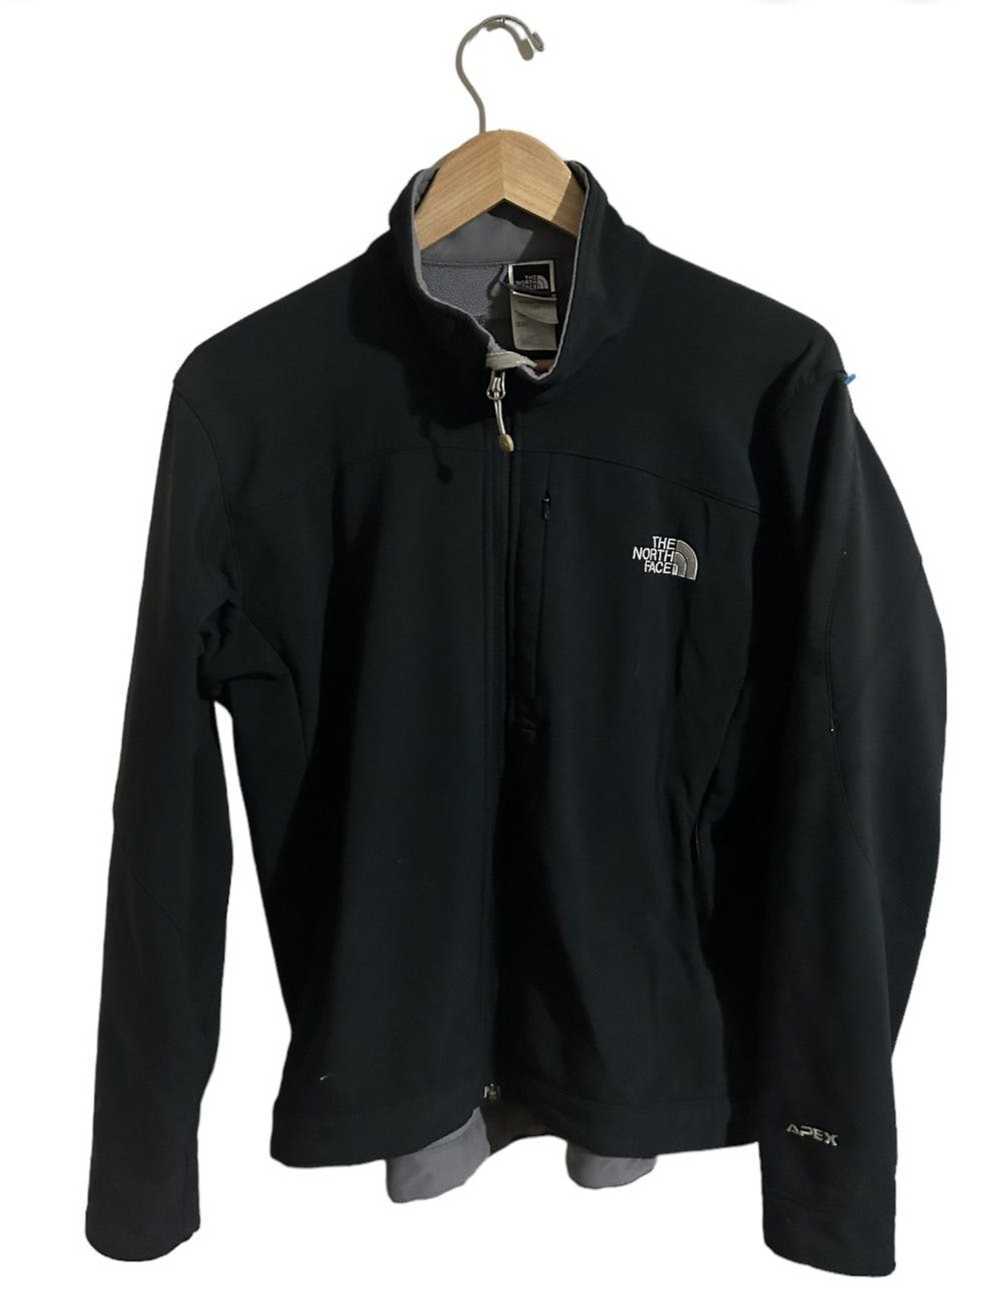 The North Face North Face Apex Jacket - image 1